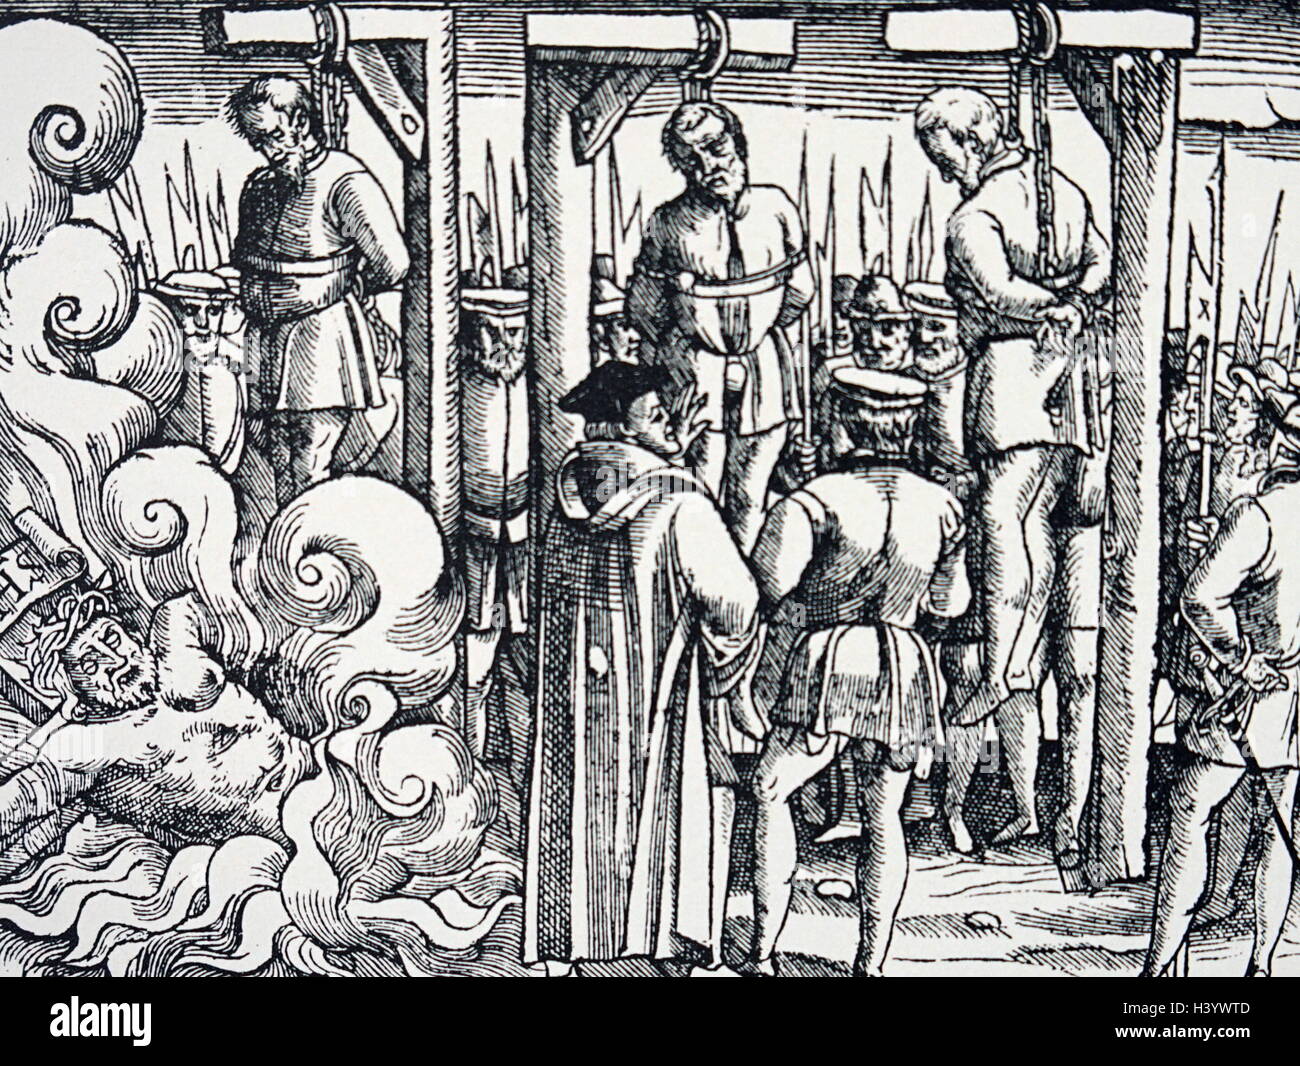 Woodcut depicting public hangings and burnings at the stake of Heretics. The reformation saw the summary execution of Catholic adherents in England. Dated 16th Century Stock Photo